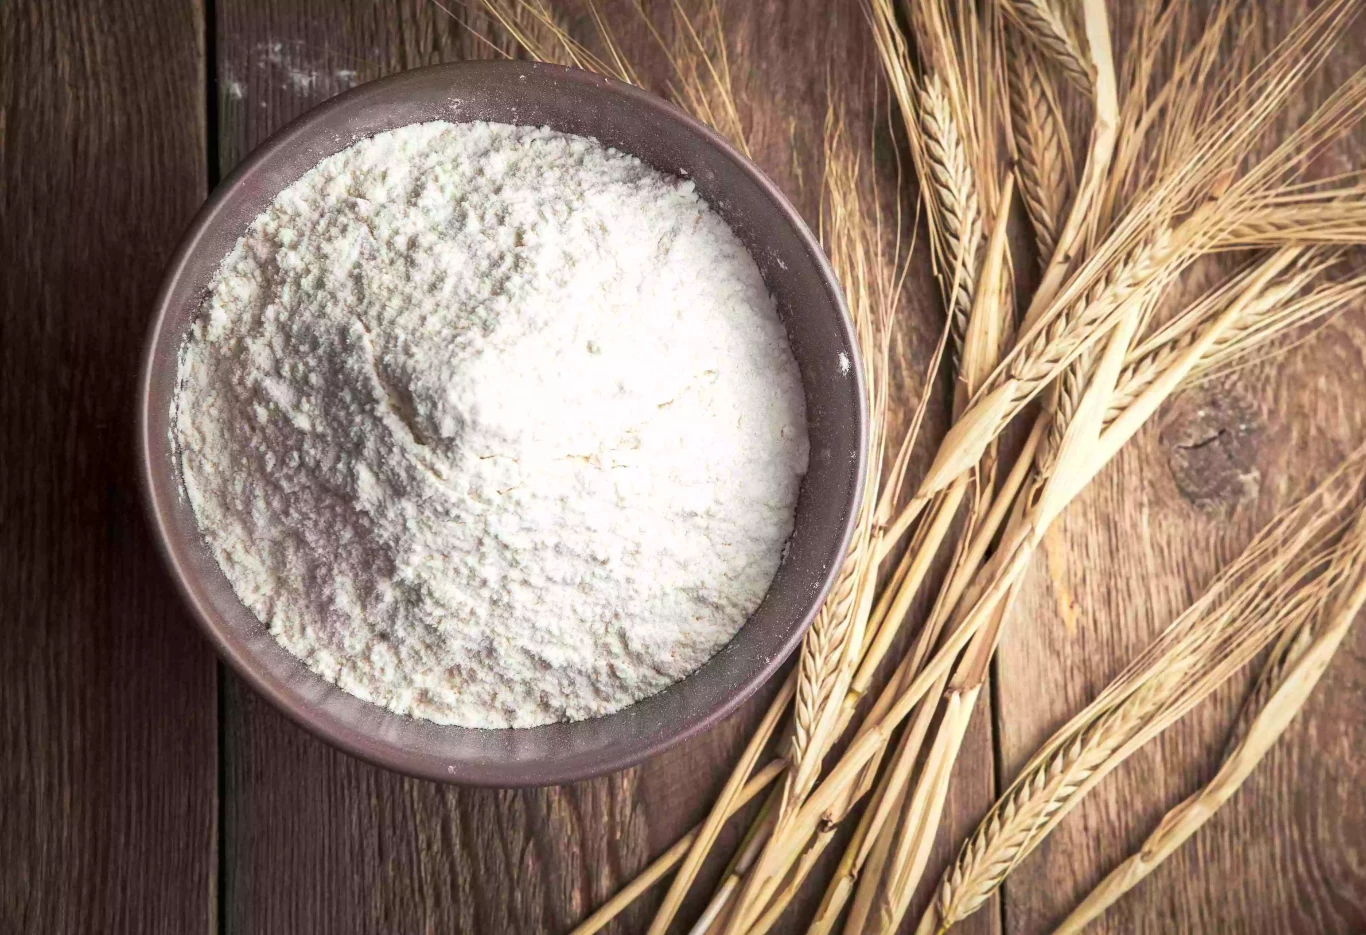 Heat-Treated Flour is a modified flour with high temperature